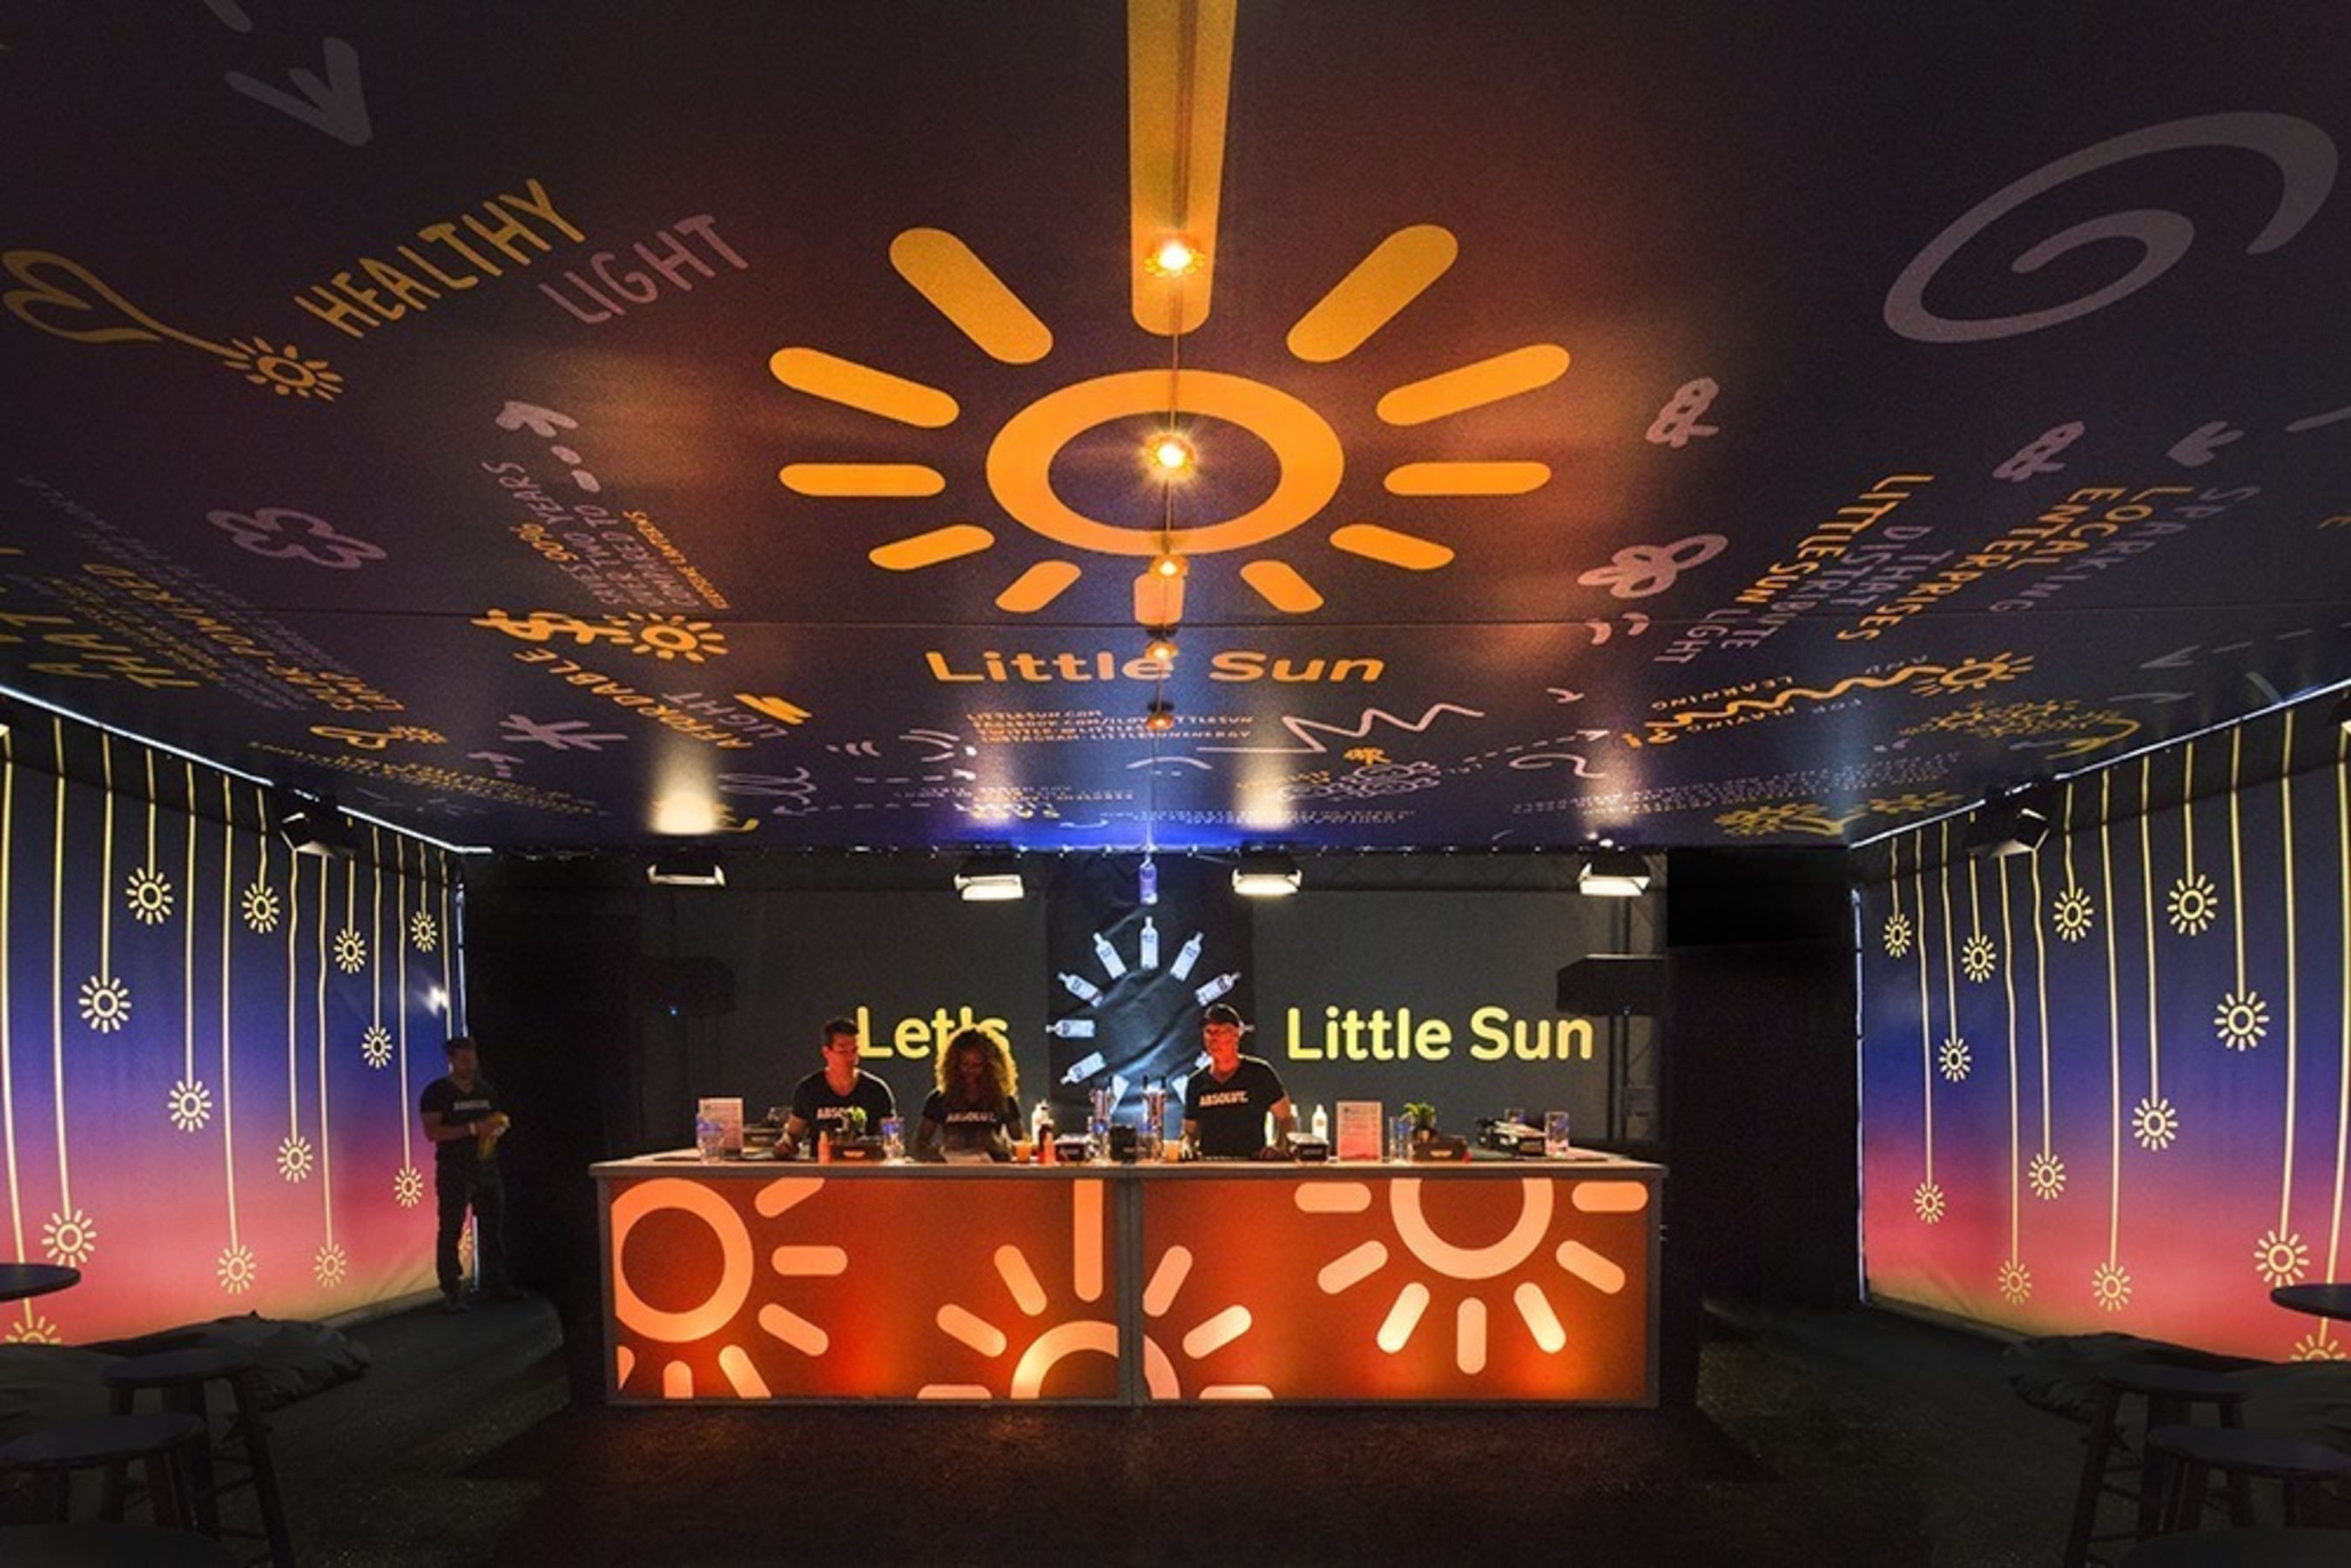 Absolut Vodka, the official spirit of Coachella Valley Music and Arts Festival, transforms this year’s festival experience with Absolut Little Sun by Olafur Eliasson. (PRNewsFoto/Pernod Ricard USA)